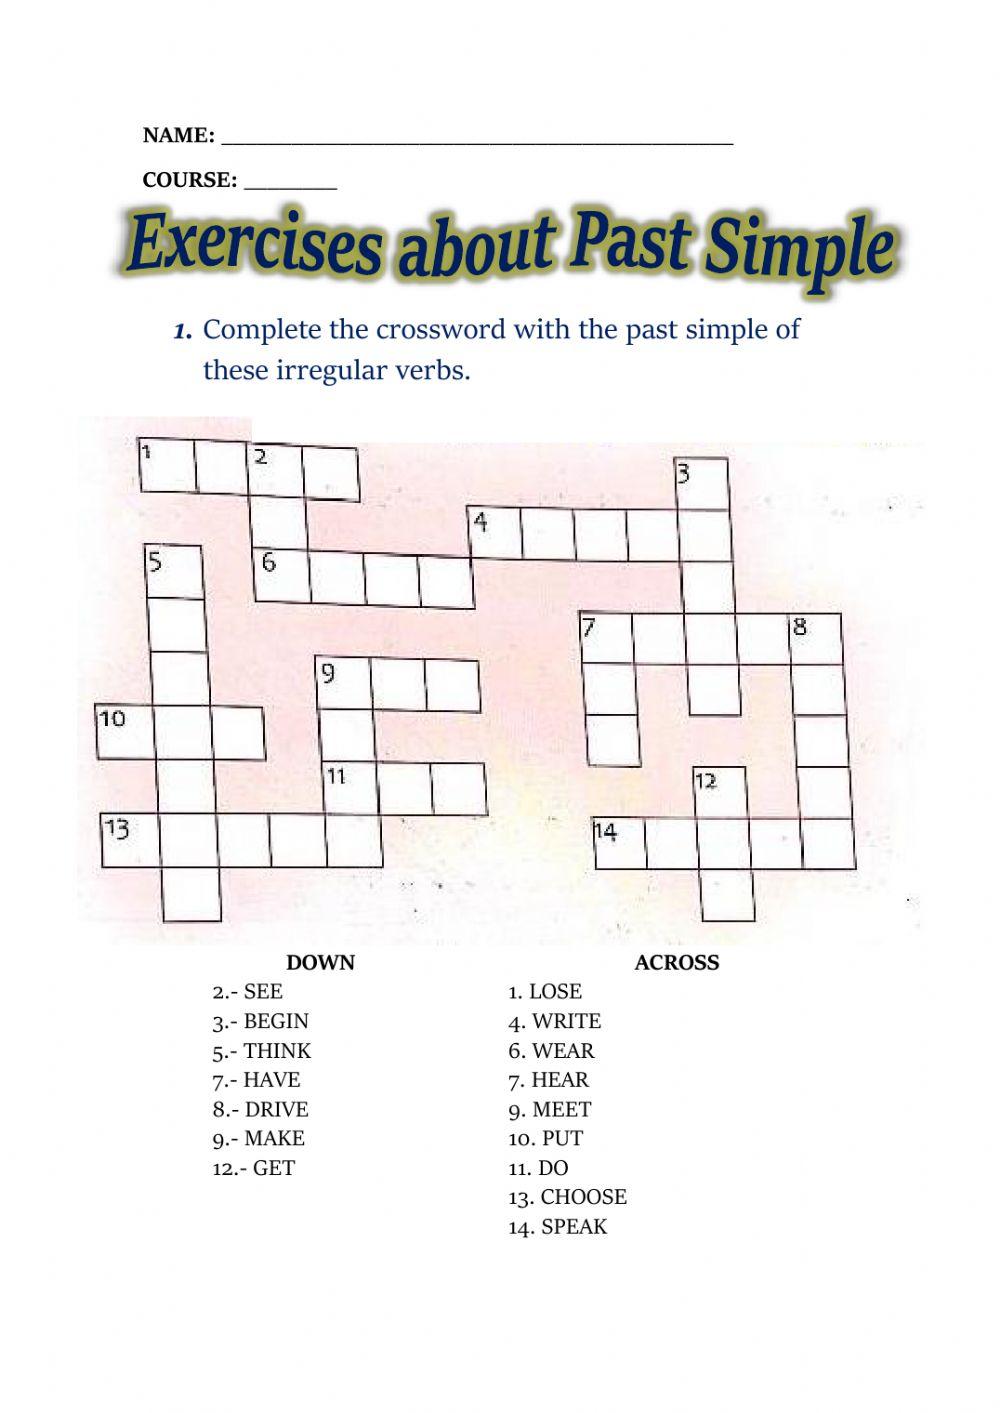 Past simple exercises